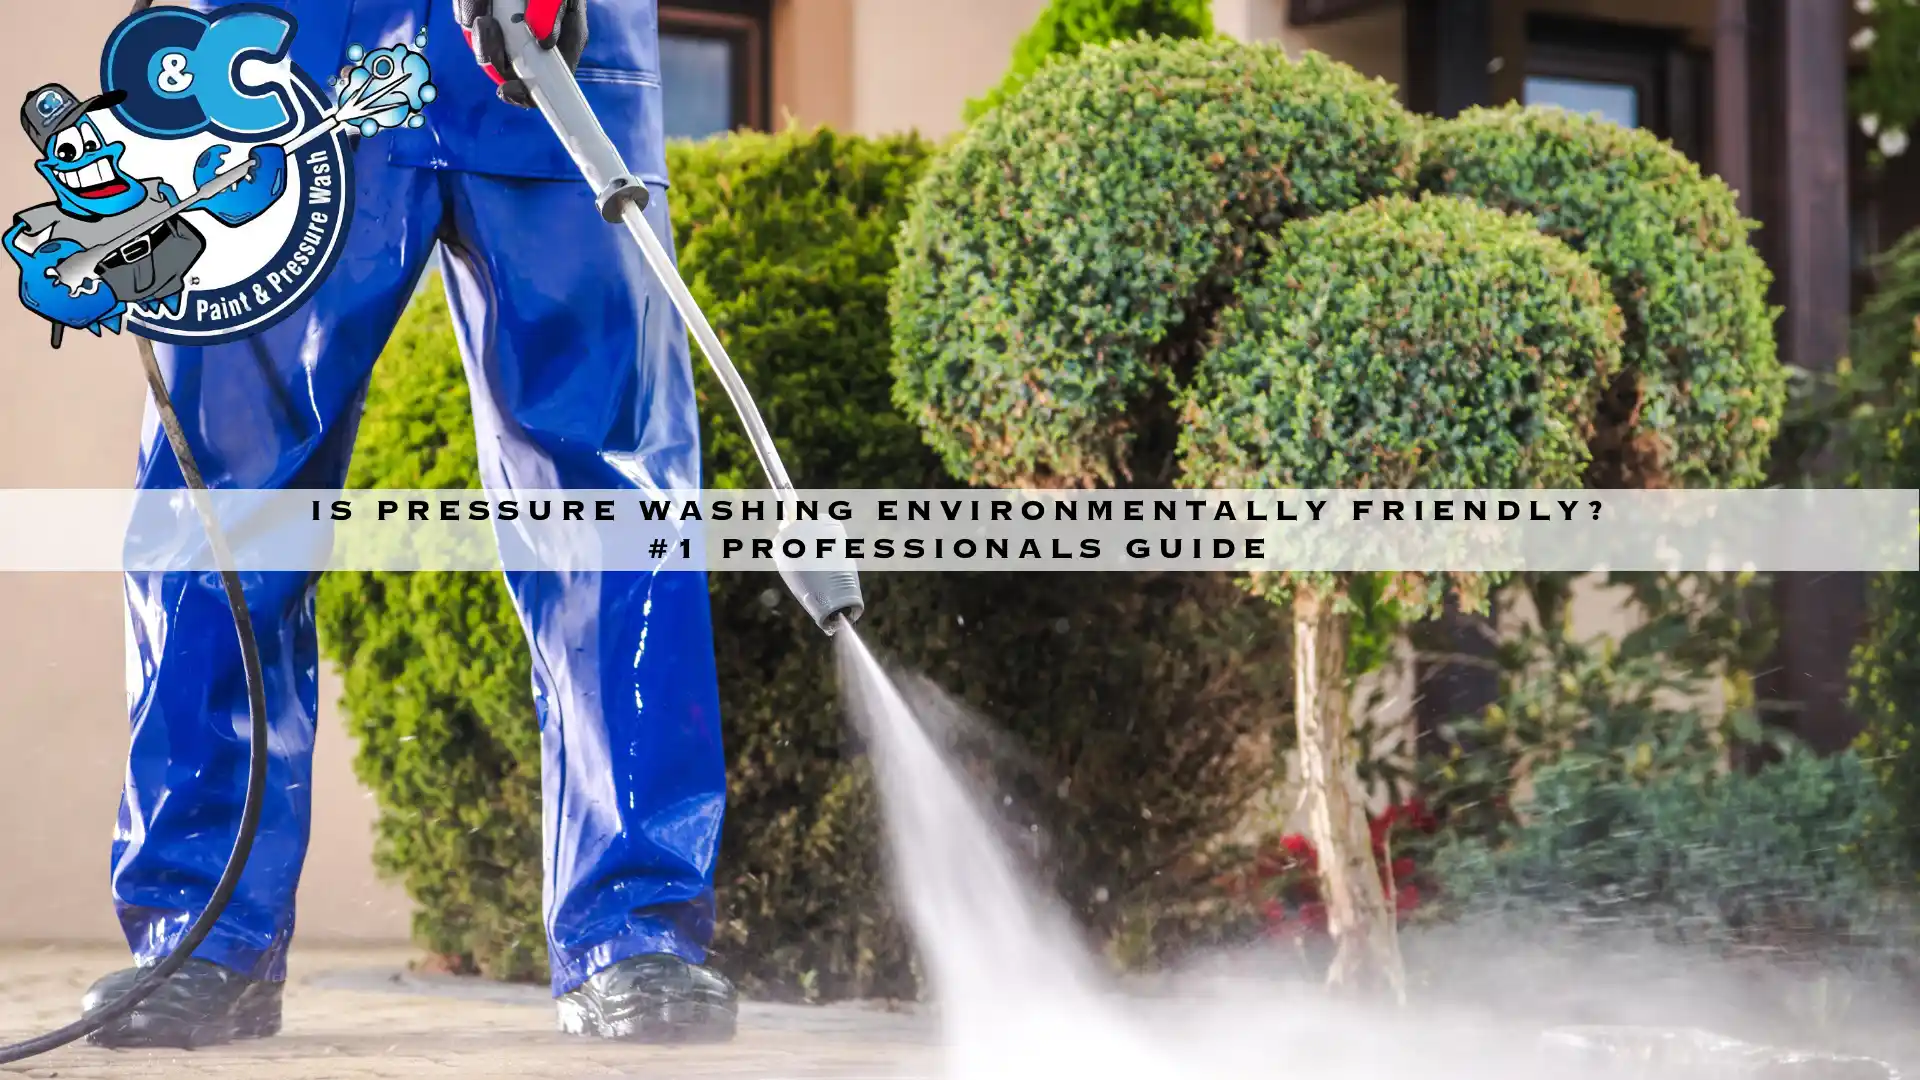 Is Pressure Washing Environmentally Friendly? #1 Professionals Guide